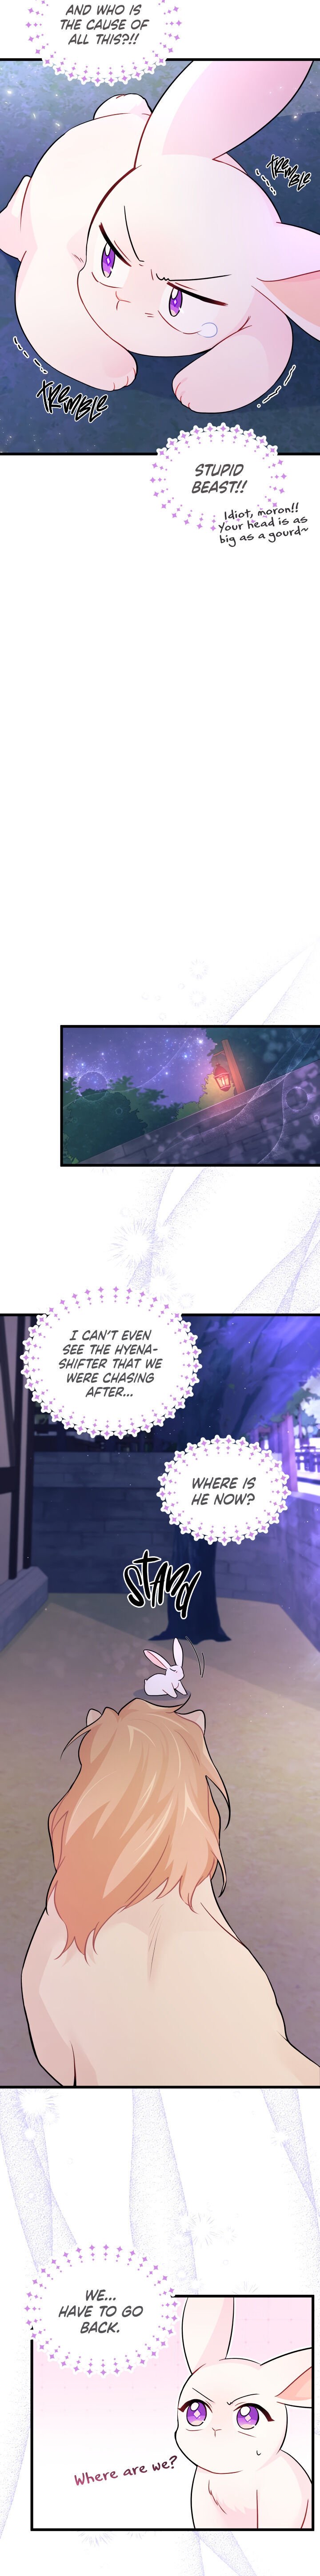 the-symbiotic-relationship-between-a-rabbit-and-a-black-panther-chap-34-17